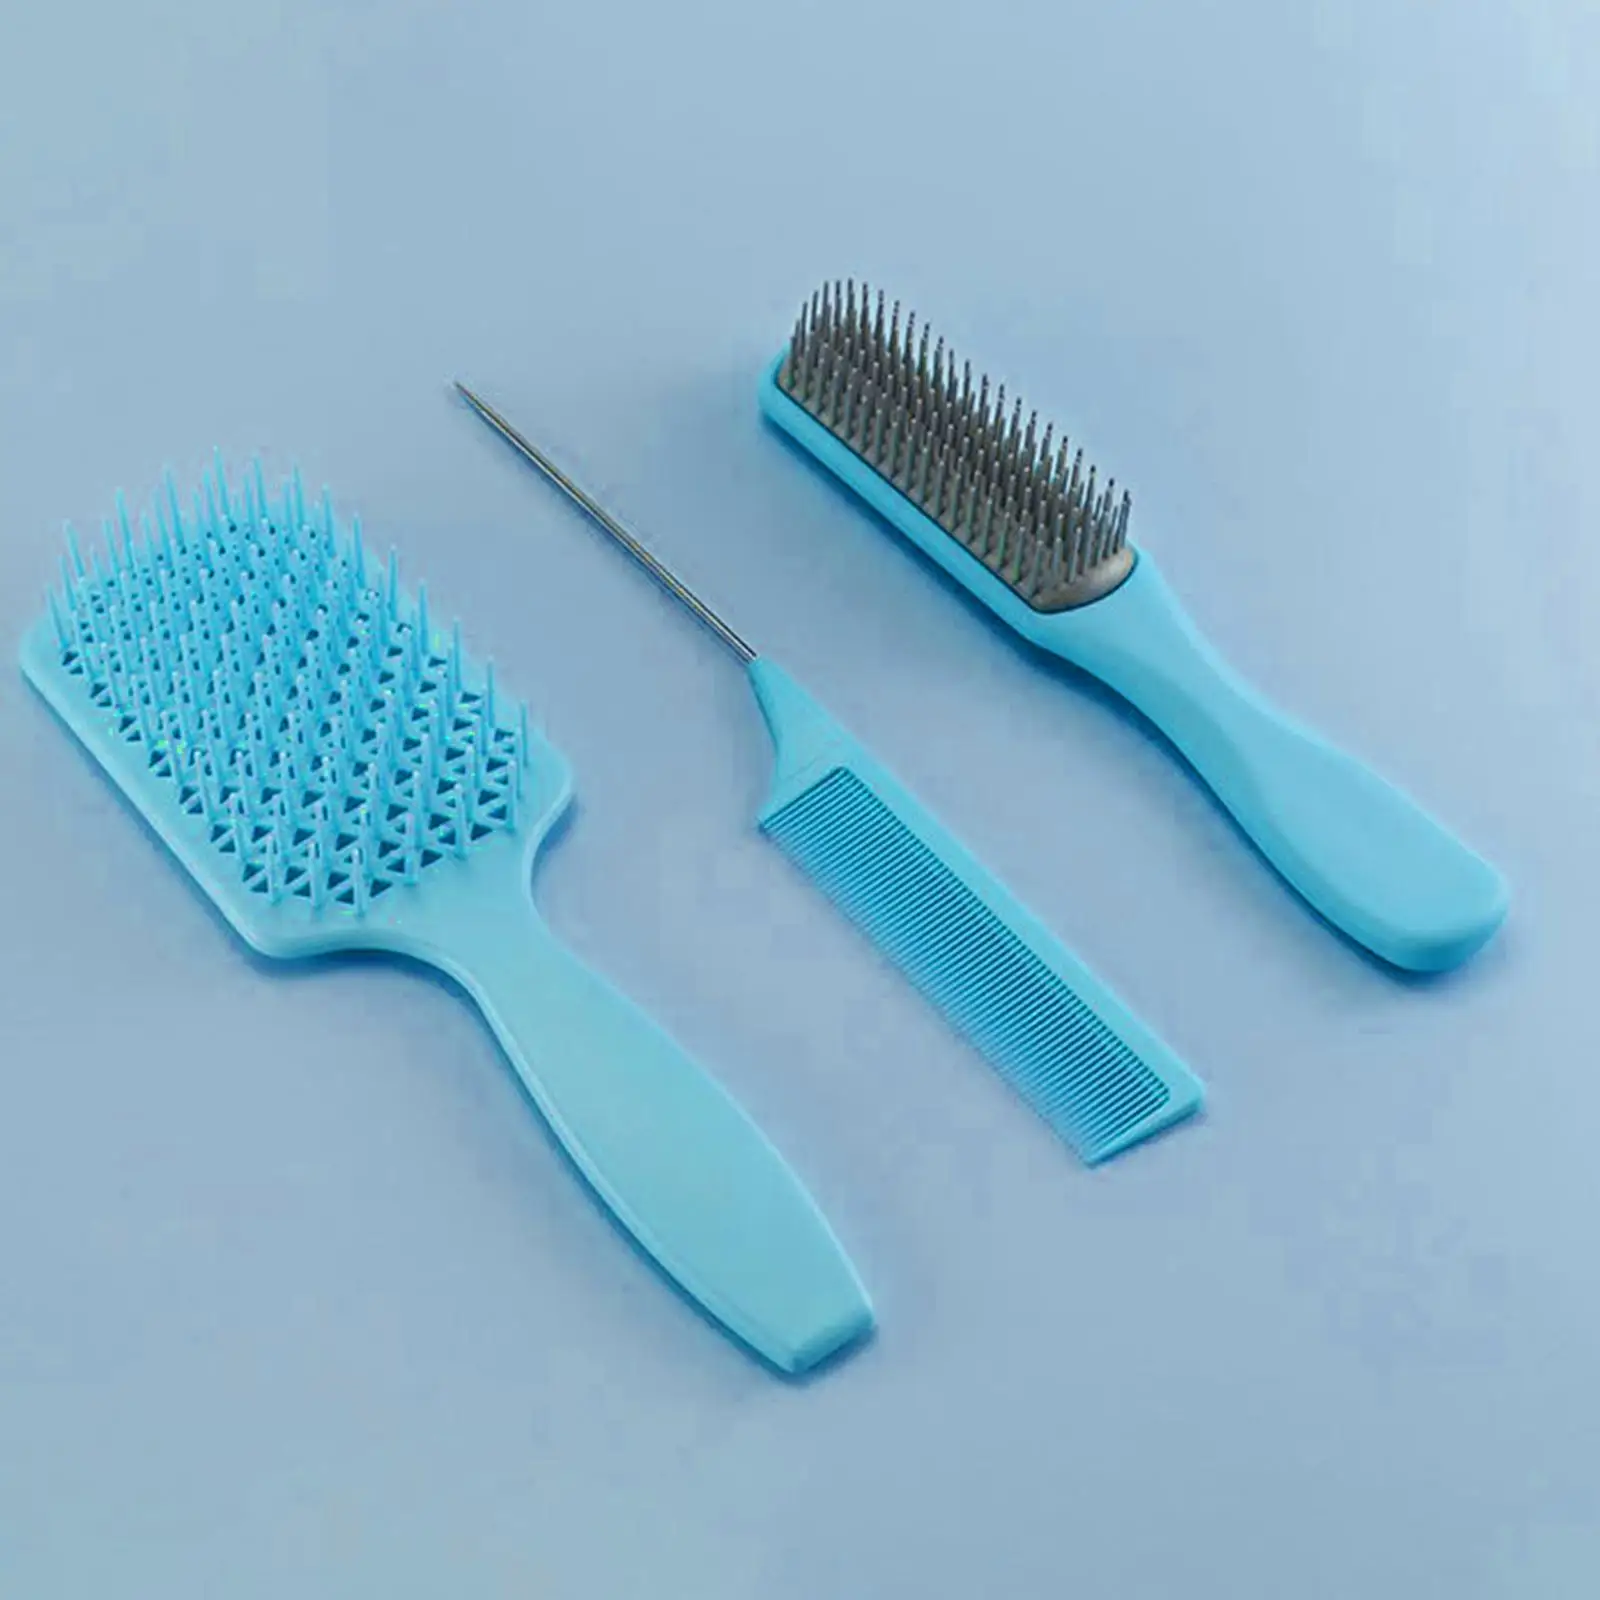 3x Hair Comb Set Smooth Handle 3 in 1 for Long Women Men and Kids